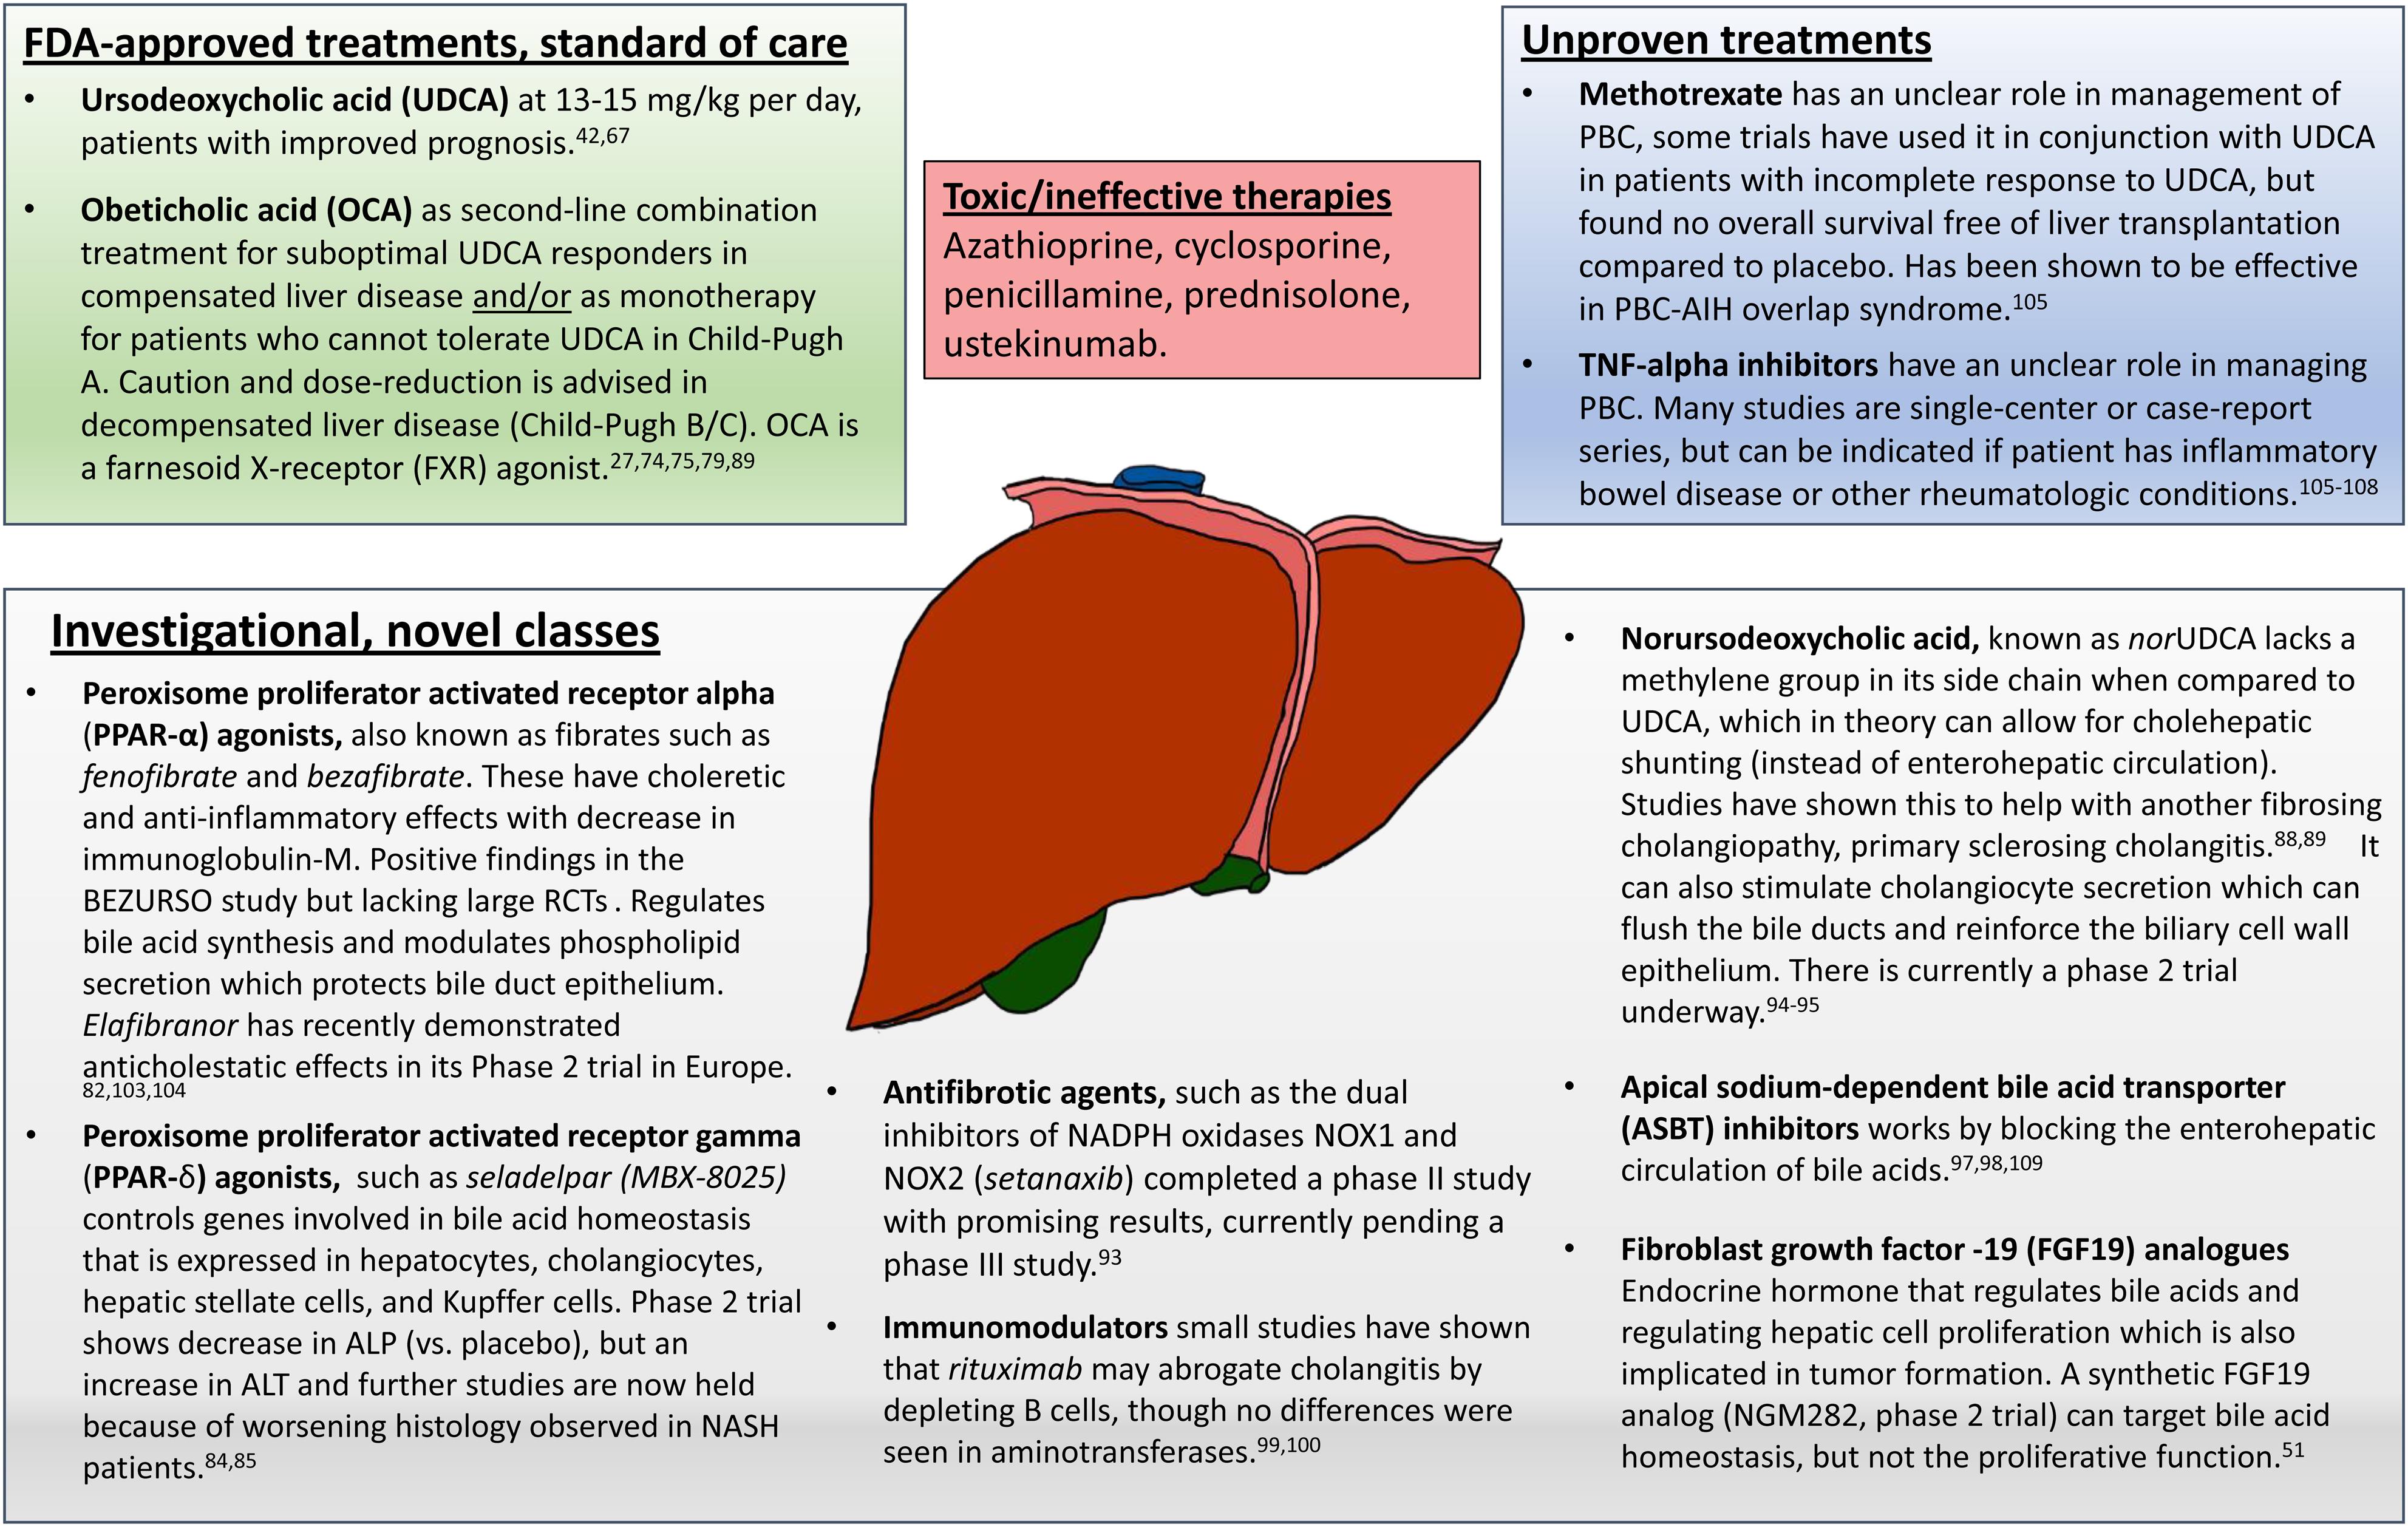 Treatment modalities for primary biliary cholangitis: What we know in 2019.